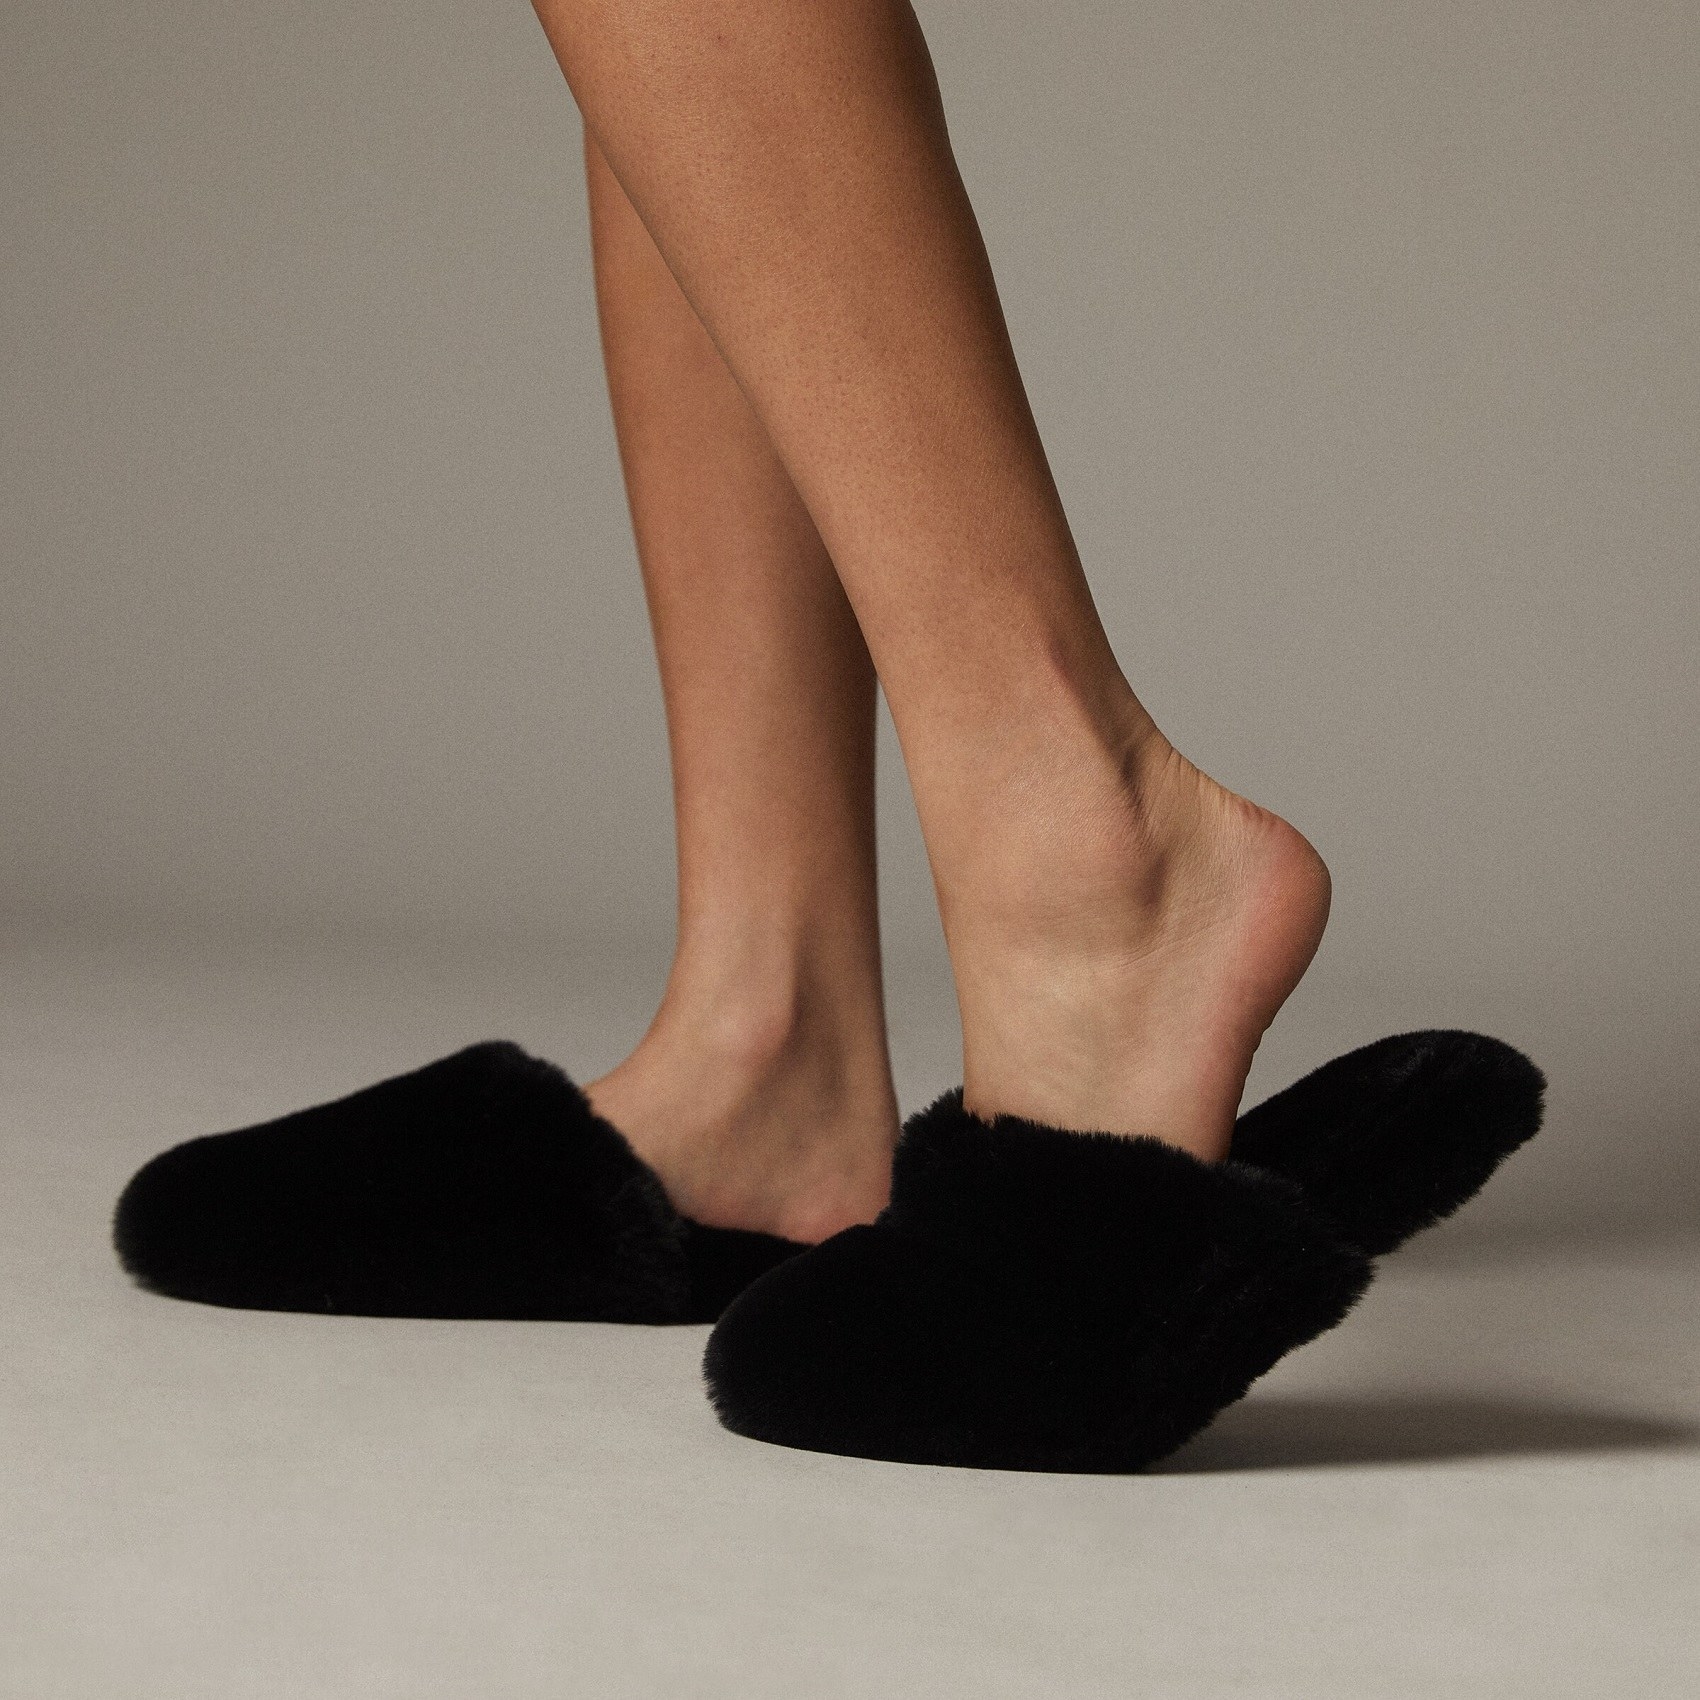 A person wearing furry slippers on their feet